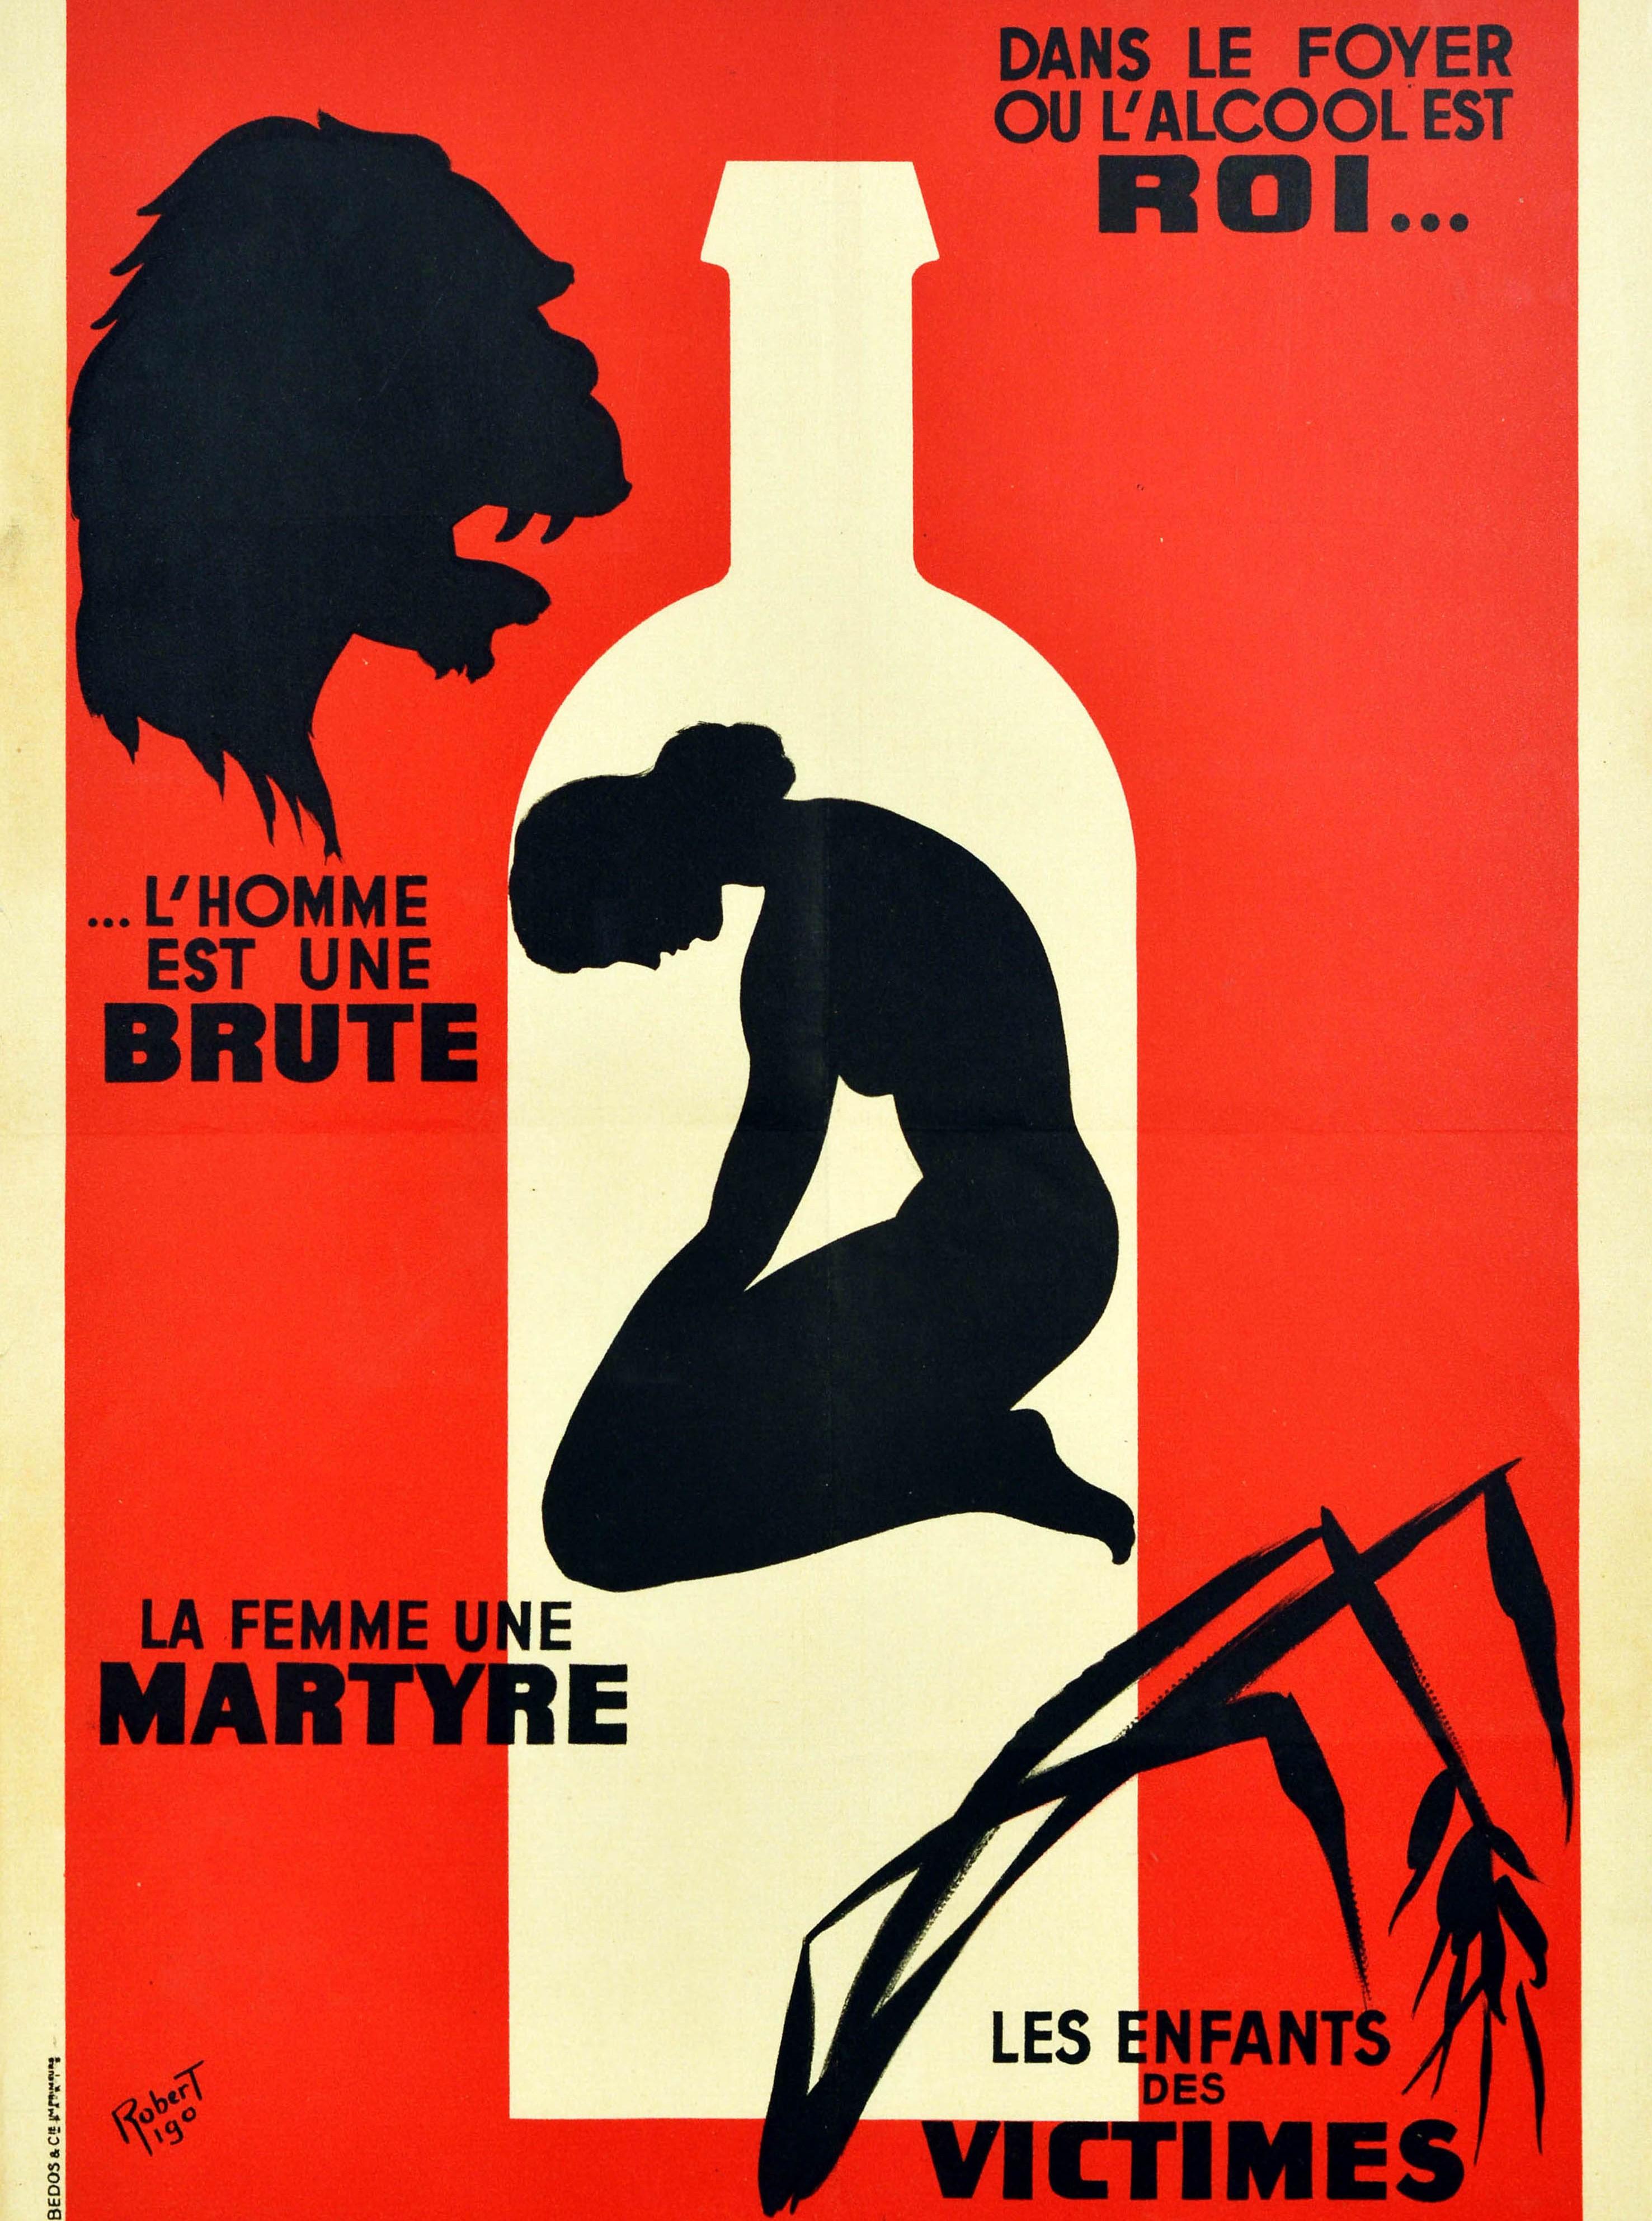 against alcohol poster